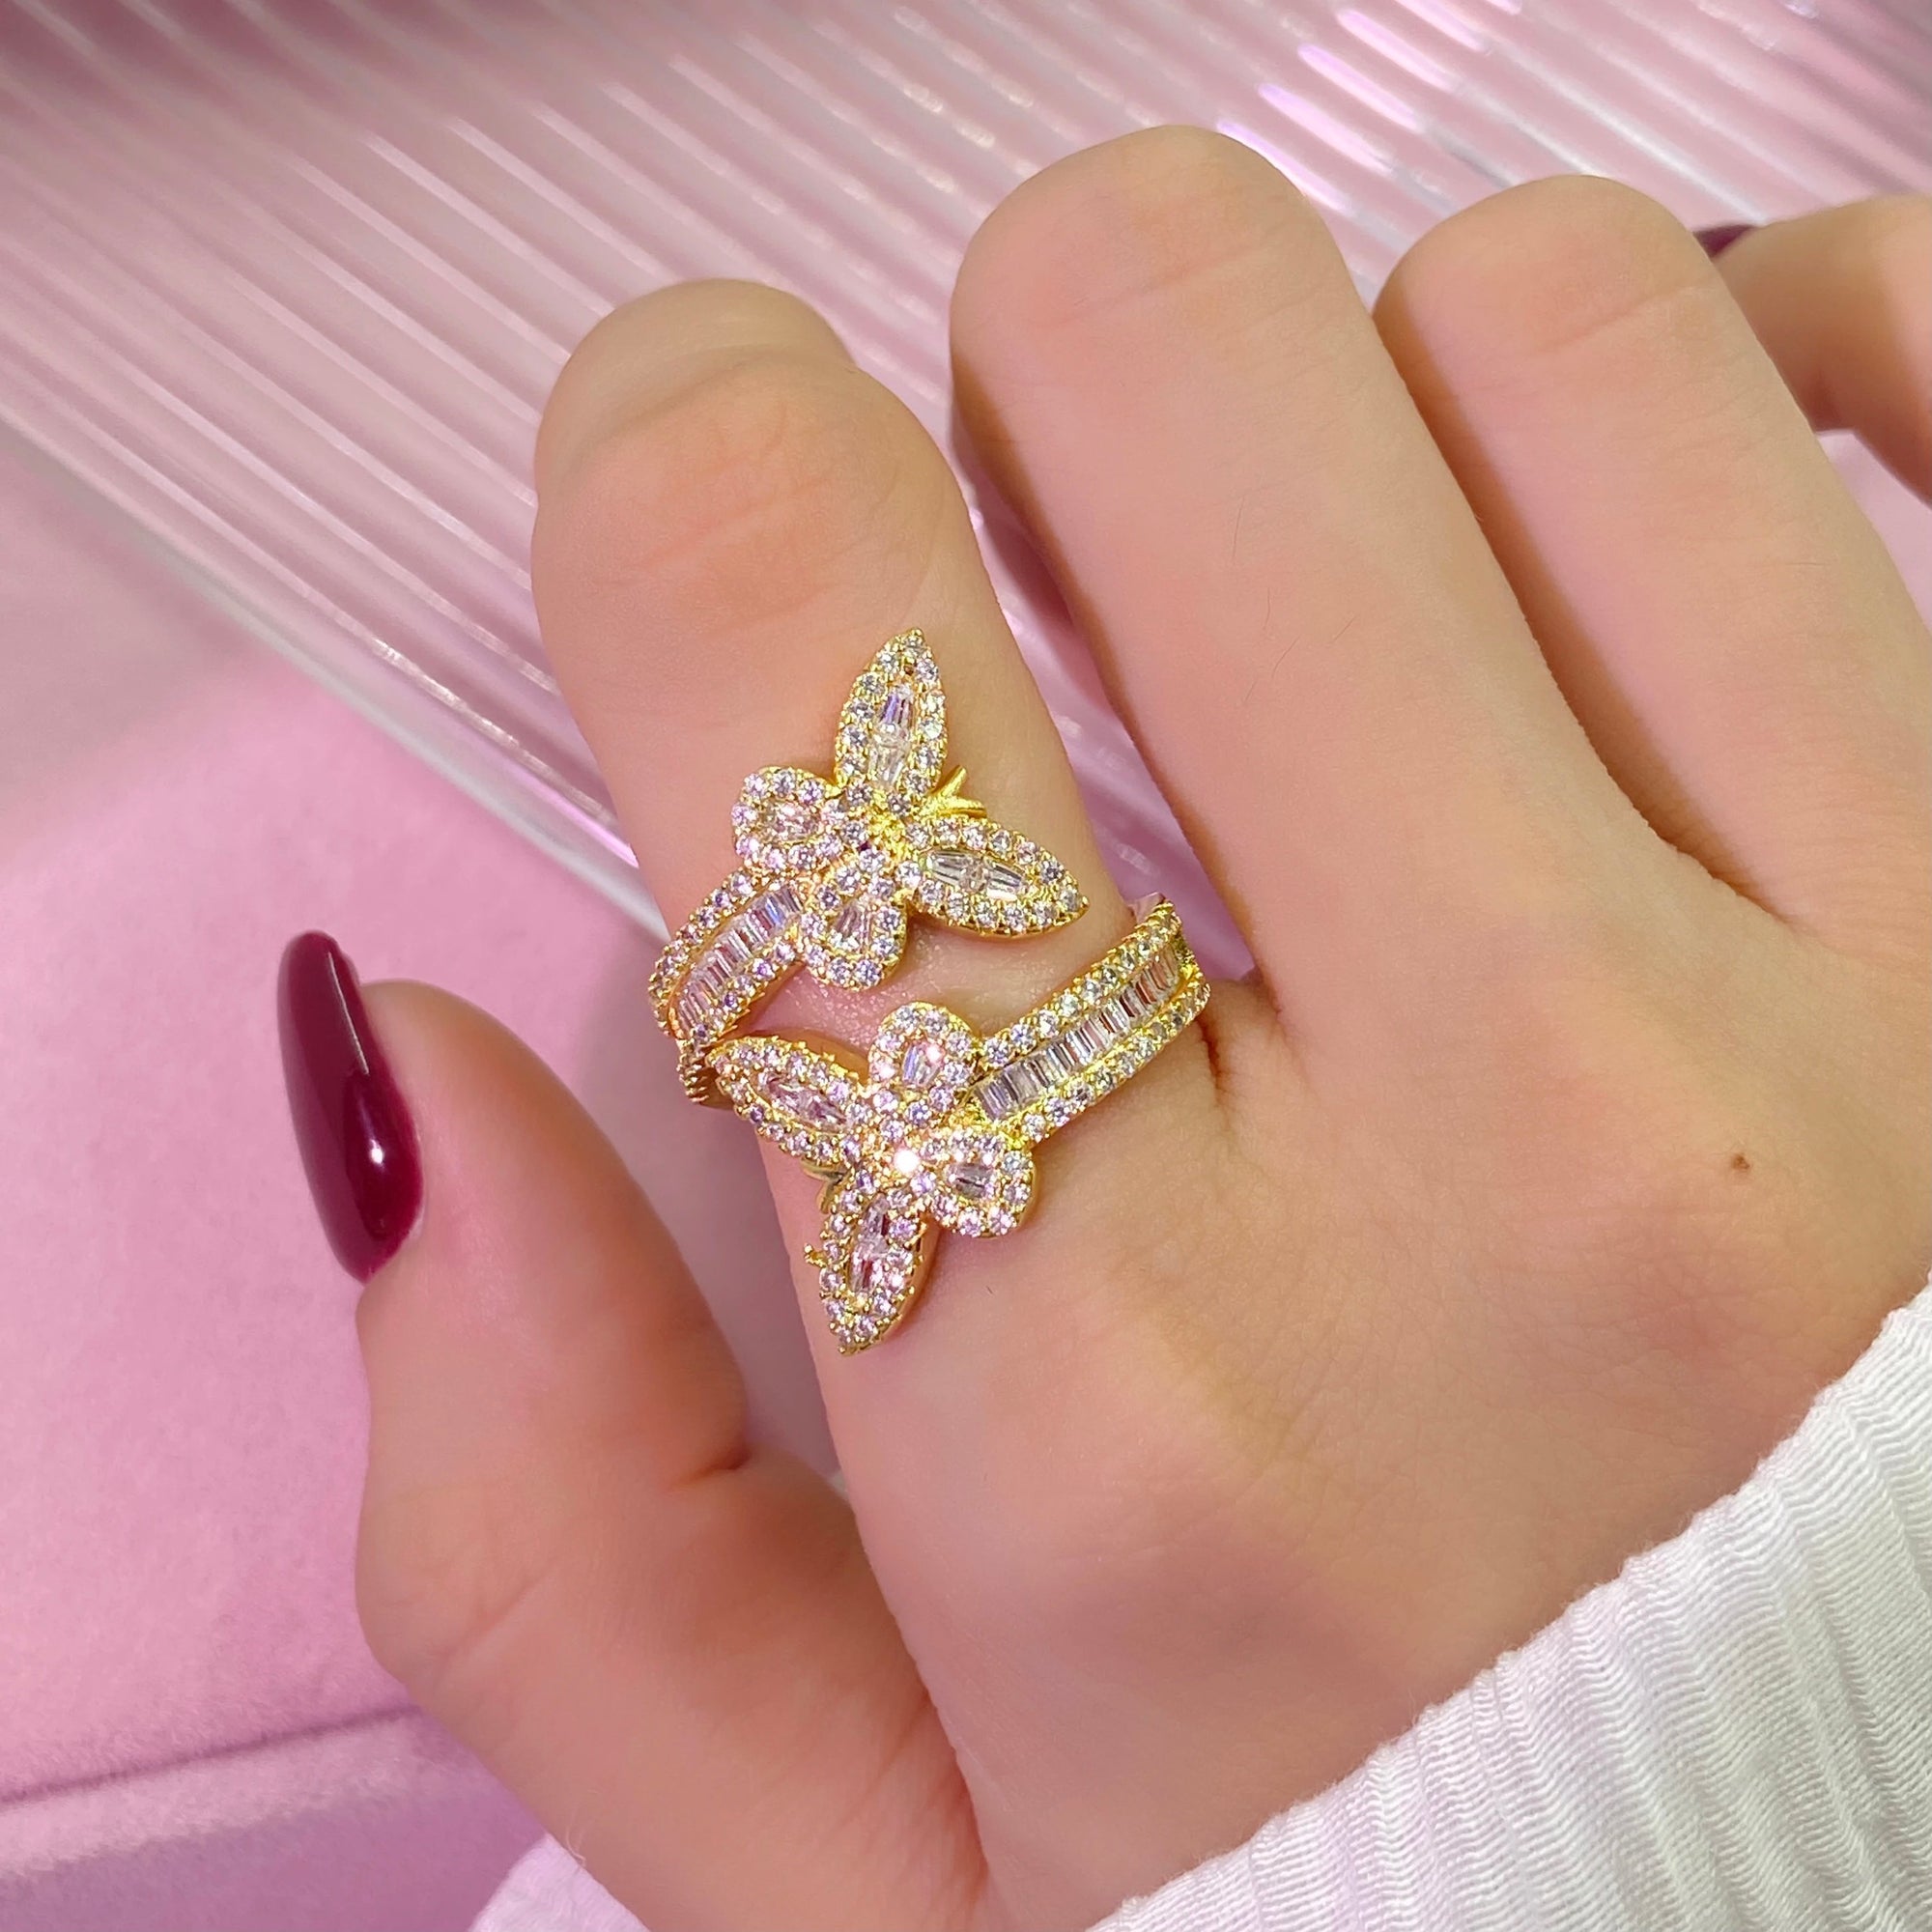 BUTTERLY KISSES RING